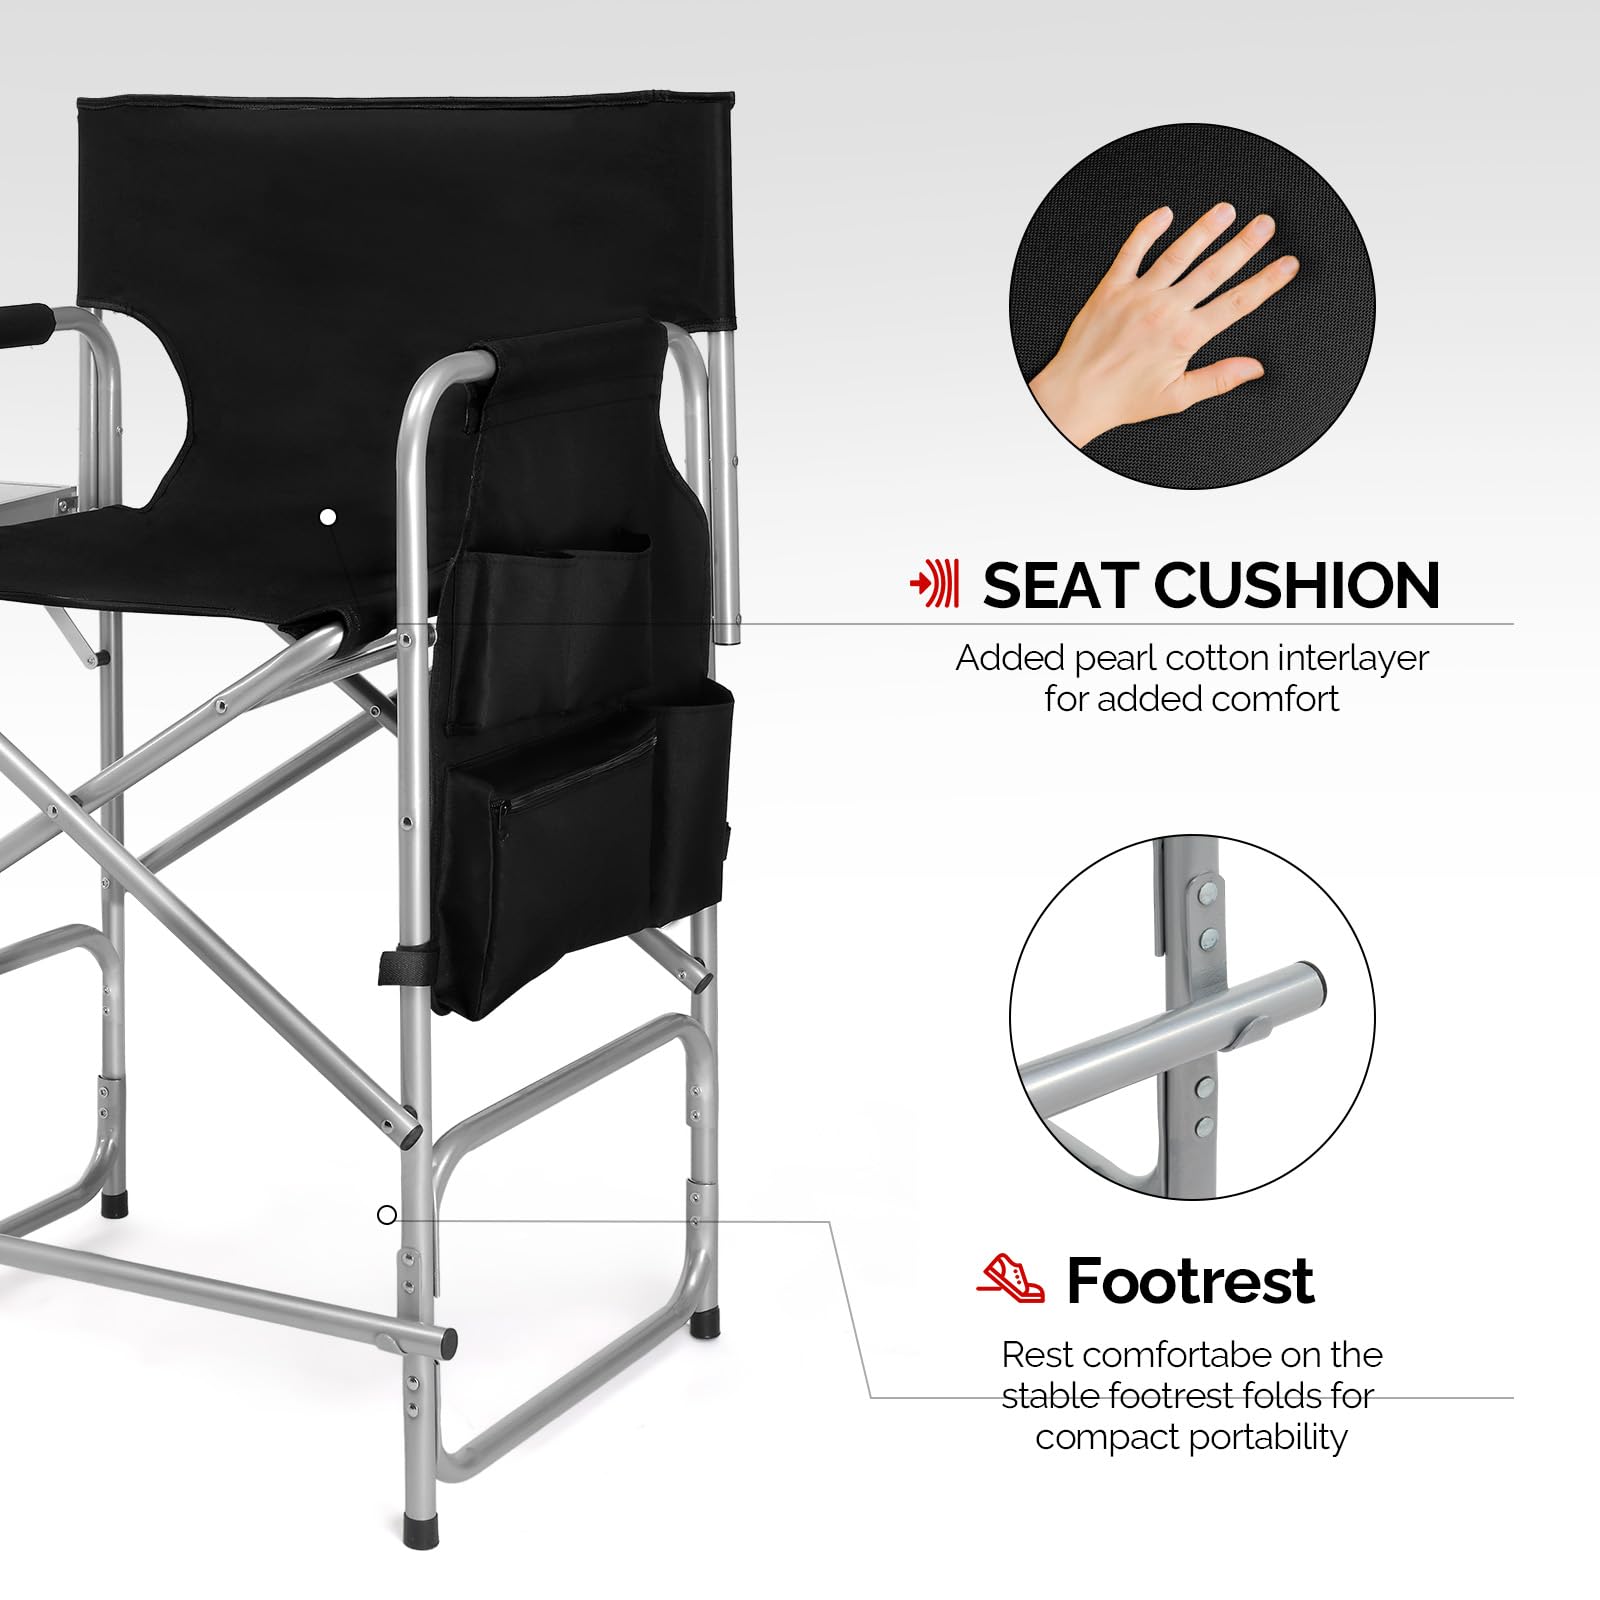 OmySalon 26" Tall Portable Folding Directors Chair with Side Table